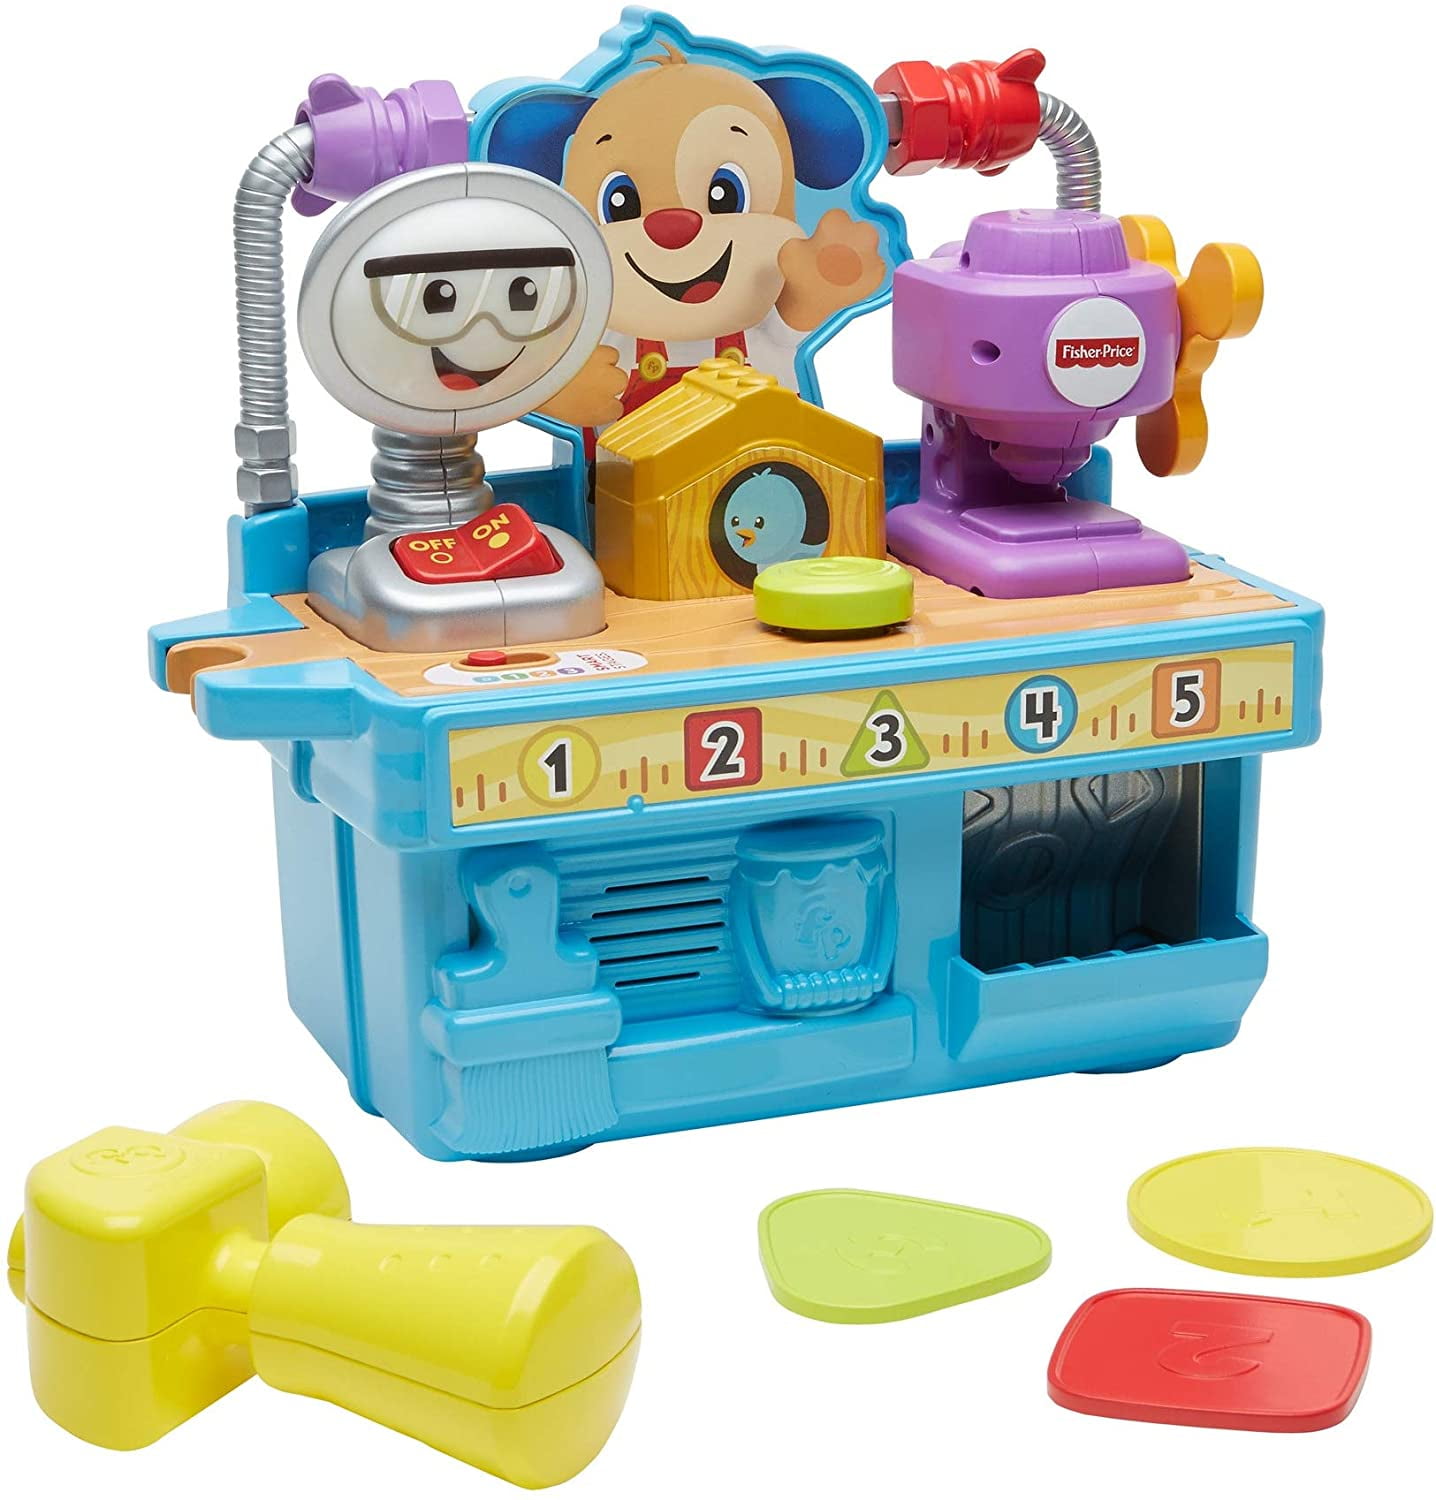 FisherPrice Busy Learning Tool Bench